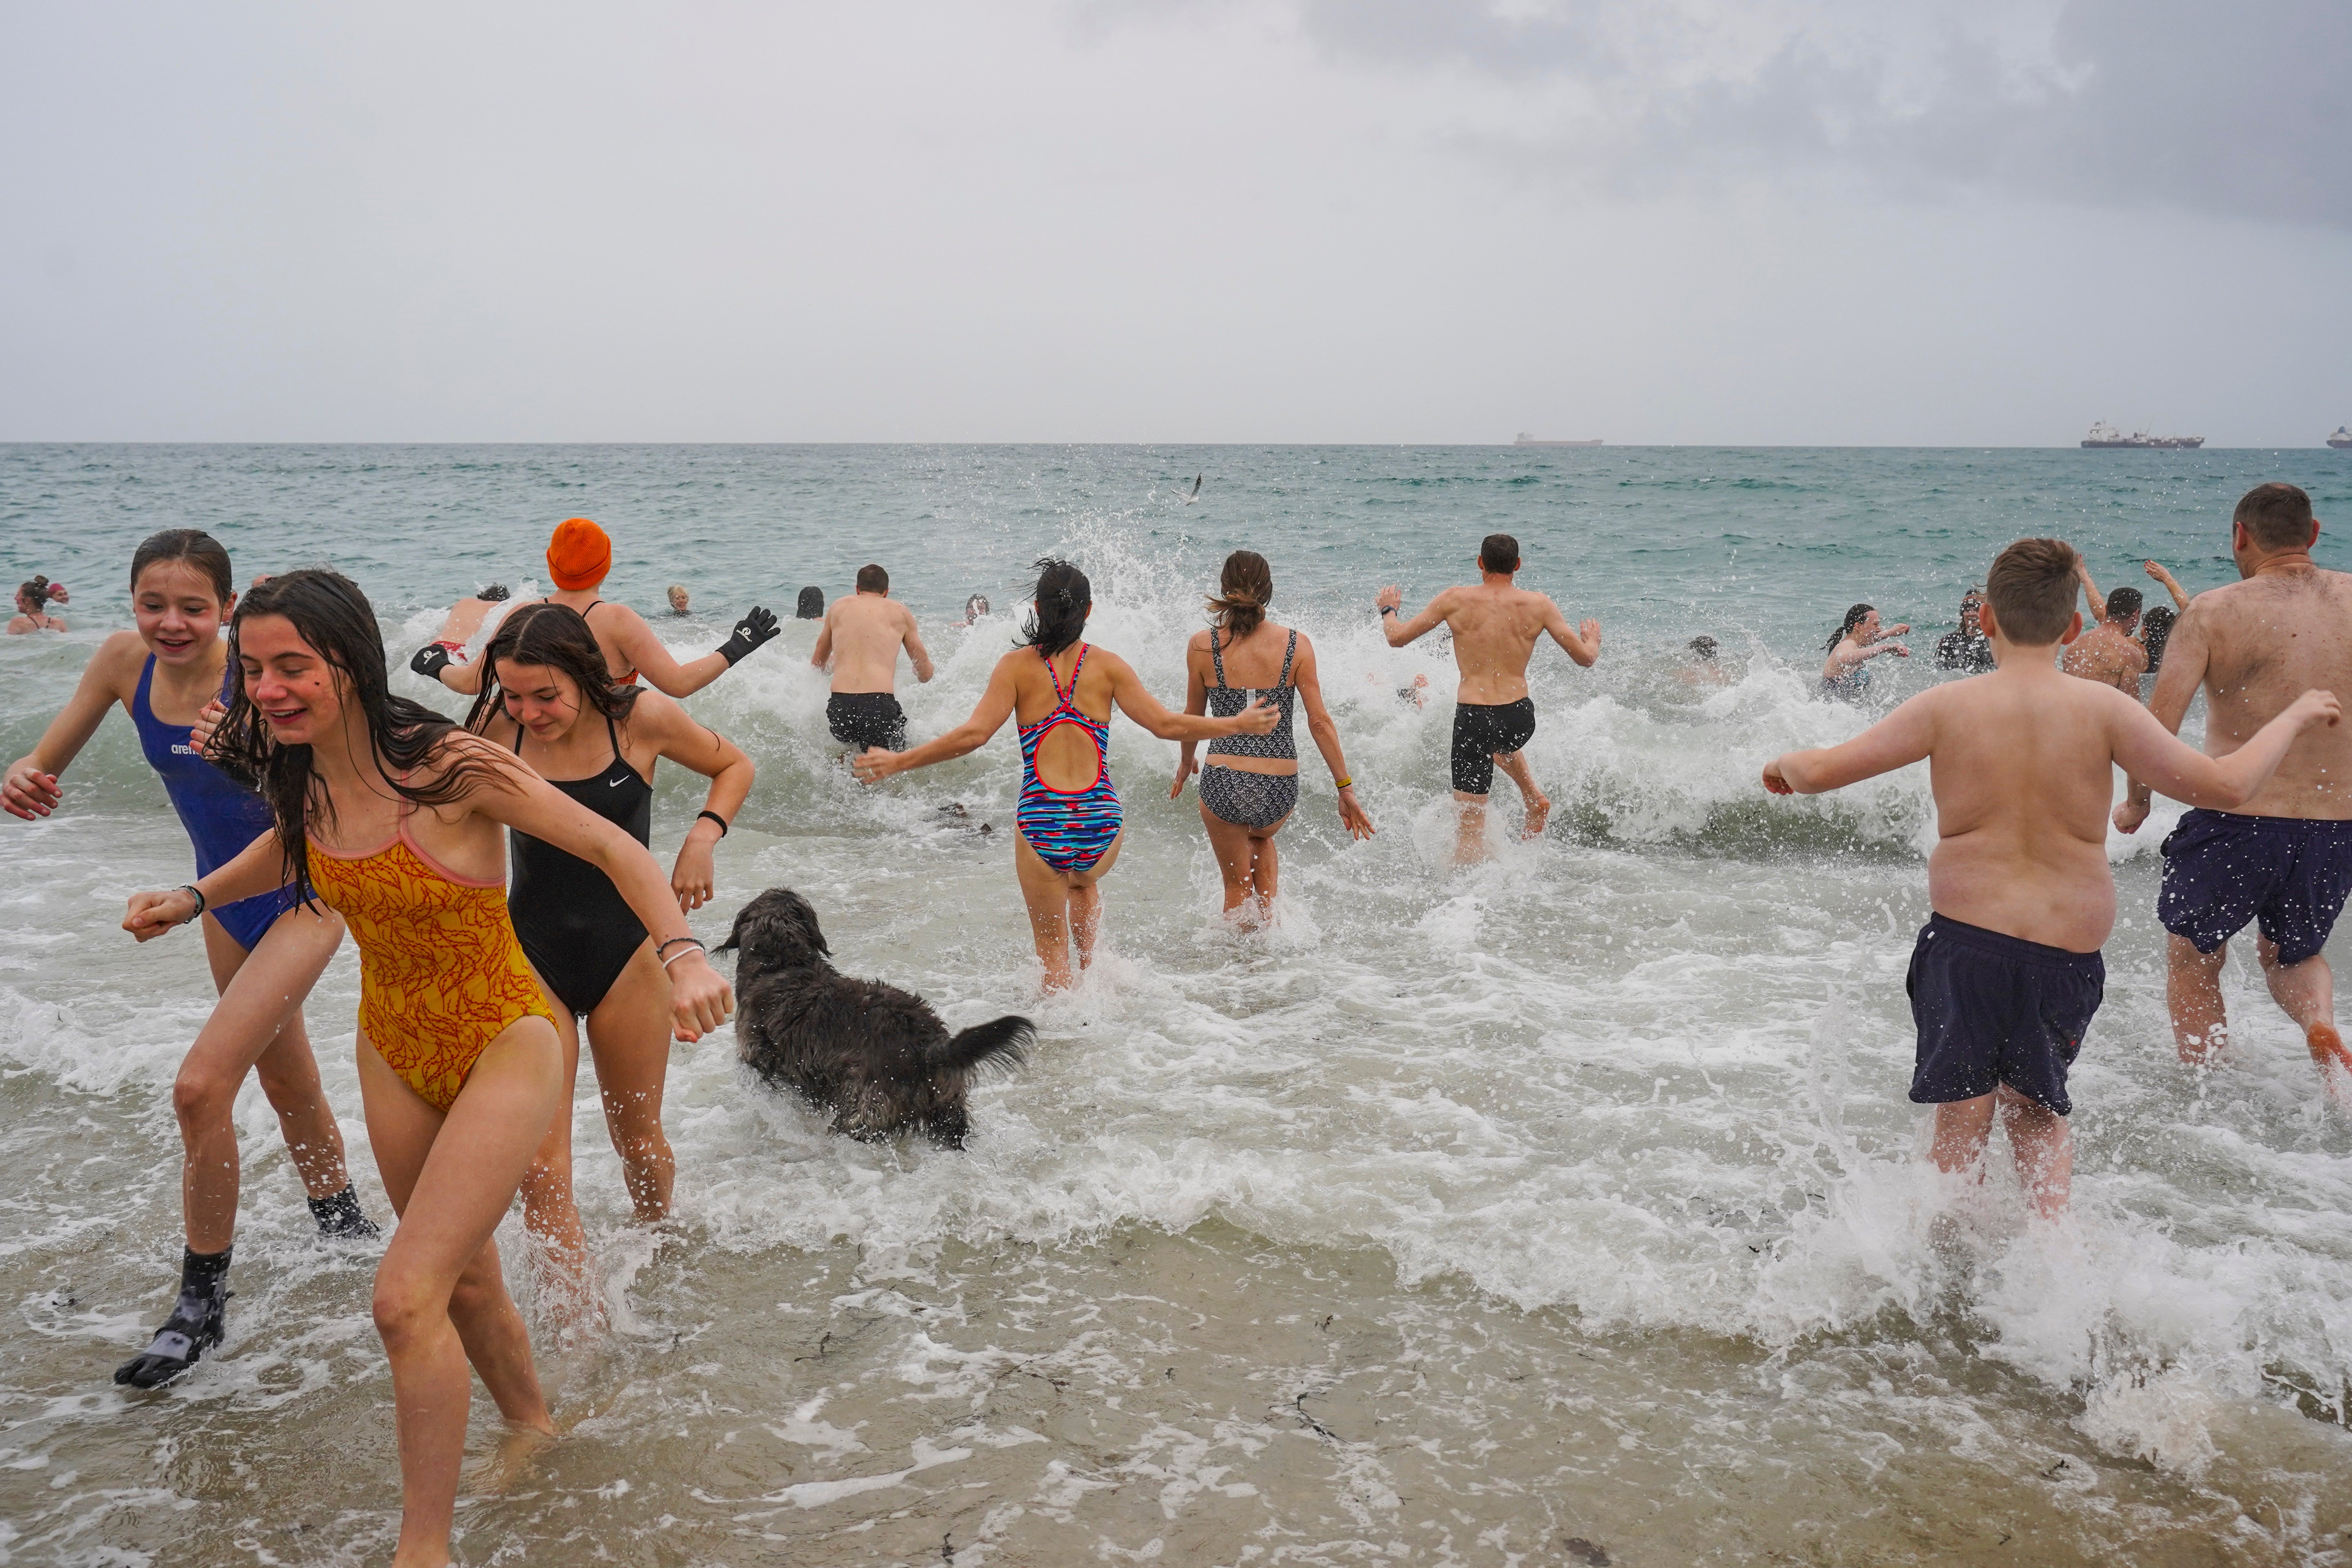 The traditional New Year’s Day sea swim in at Gyllyngvase